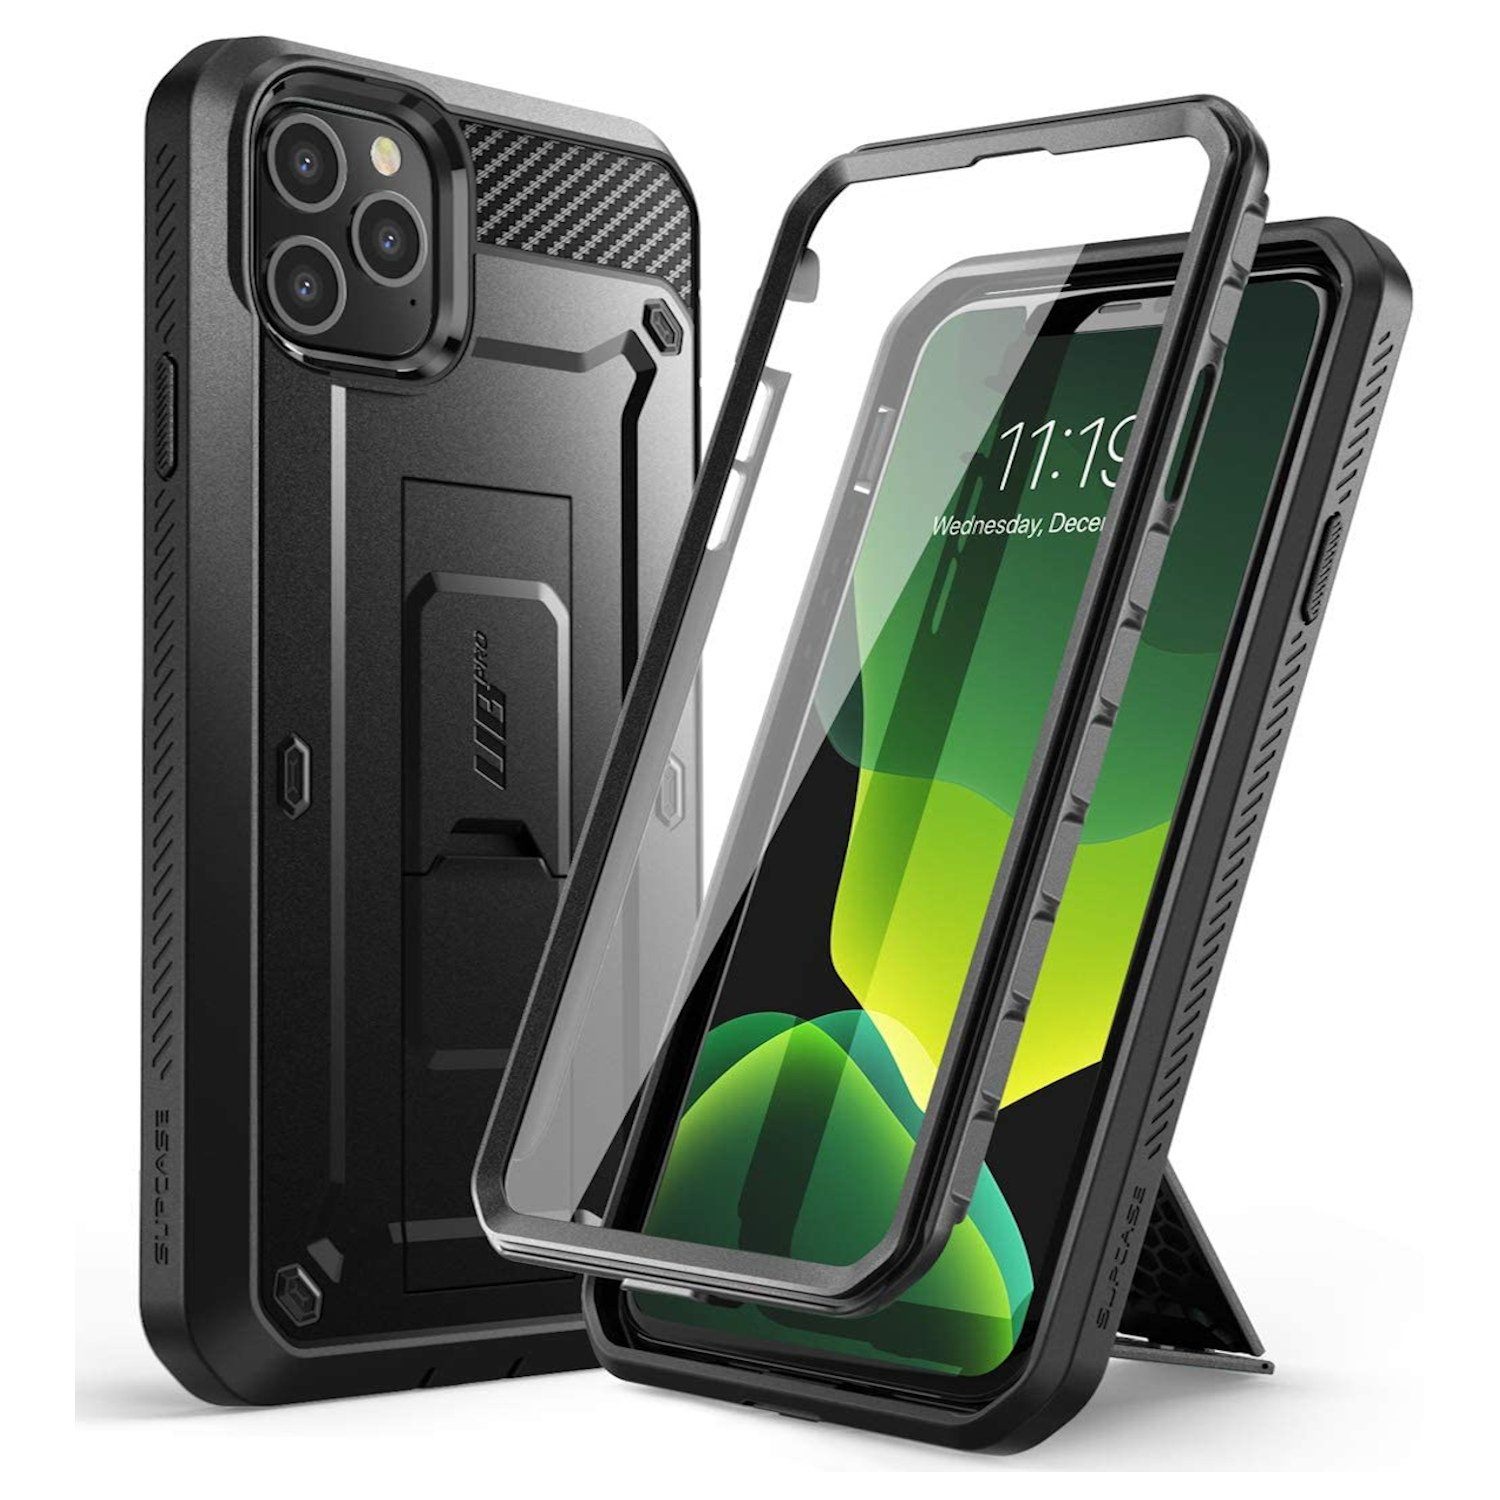 Supcase UB Pro Series Full-Body Rugged Holster Case for iPhone 11 Pro 5.8"(2019)(With Build-in Screen Protector), Black iPhone Case Supcase Black 